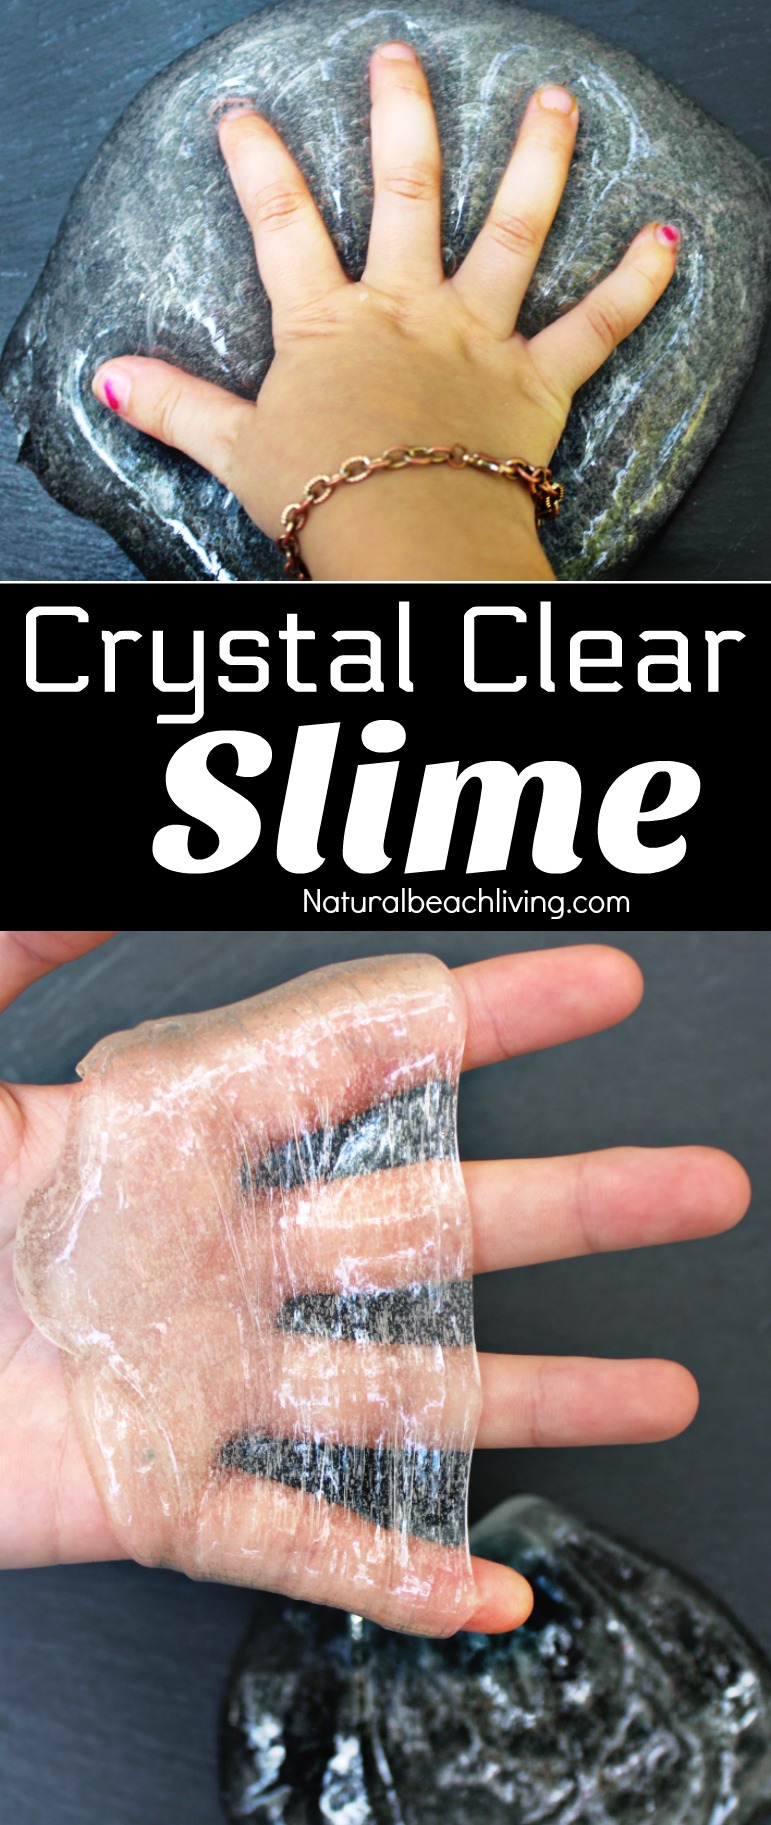 Clear Slime Recipe and lots of fun ways to enhance it with amazing clear slime recipe ideas. You'll see How to Make Clear Slime with no fails. These slime recipes are the best! Slime recipe with Contact Solution, Crystal Clear Slime and The most Amazing Gingerbread Slime